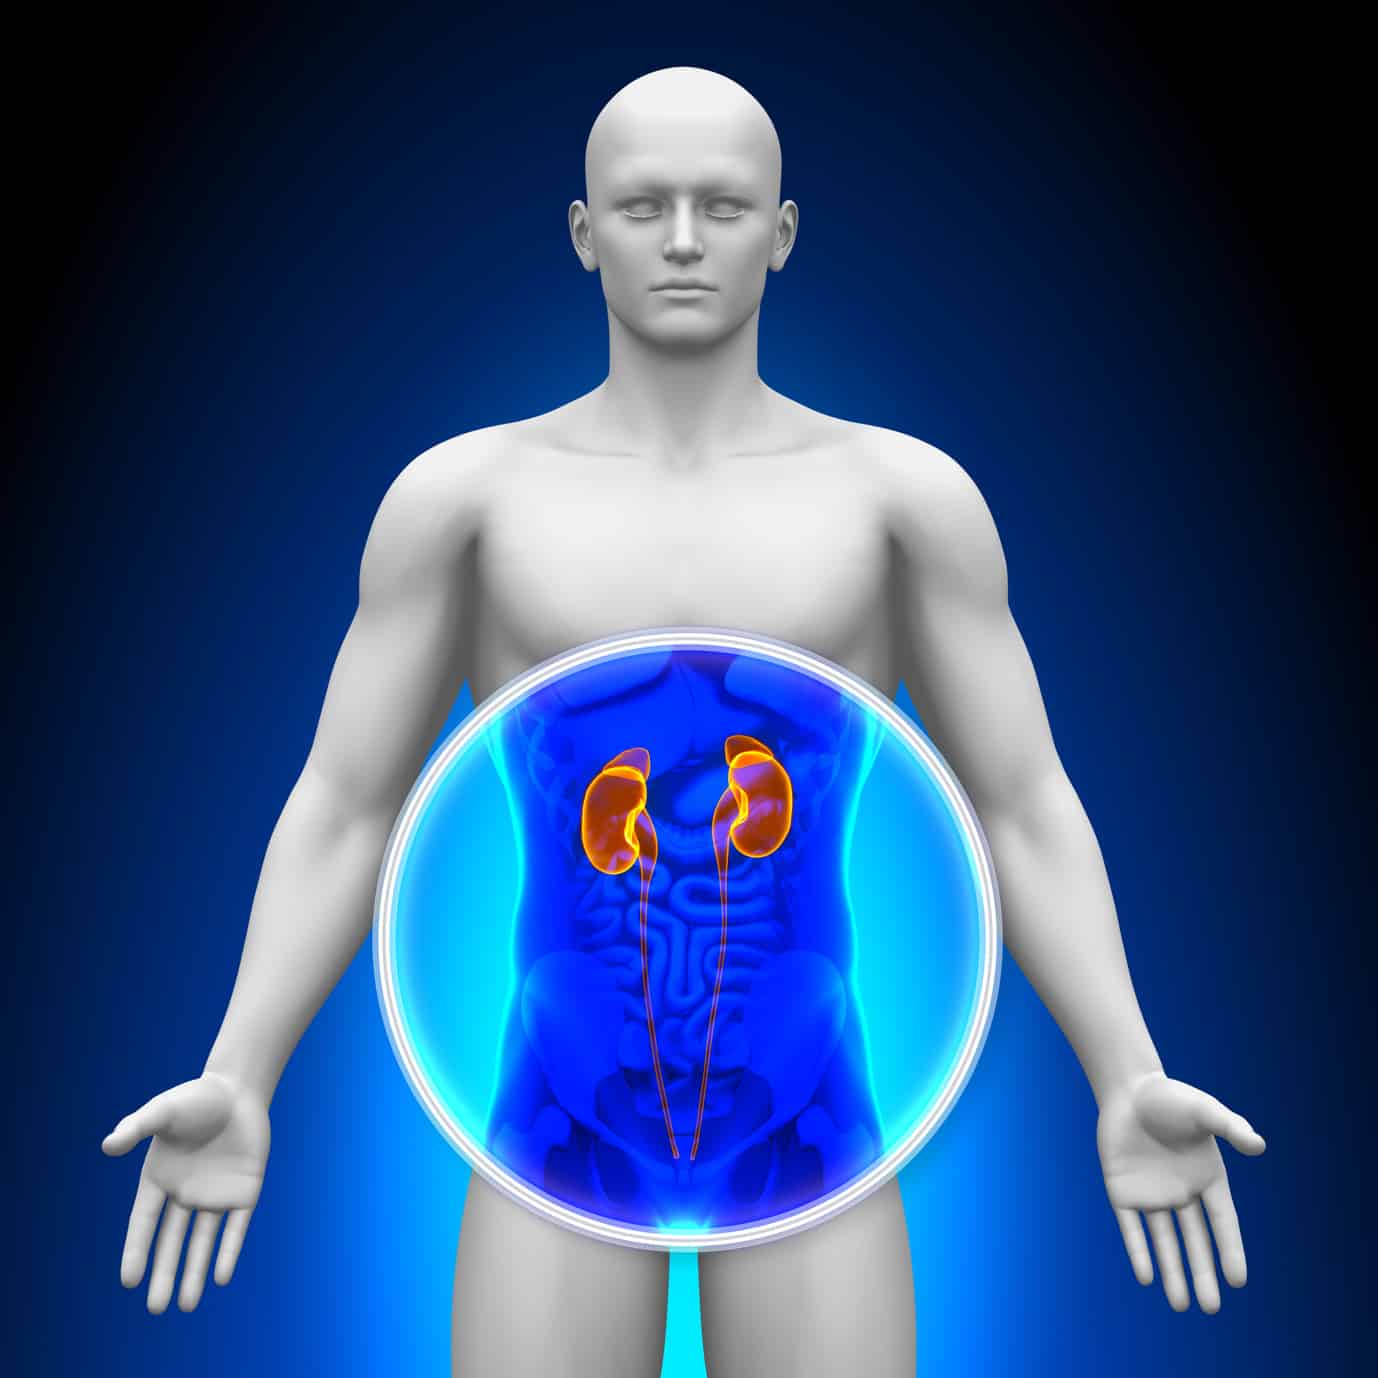 What Are the Symptoms of Kidney Cancer?